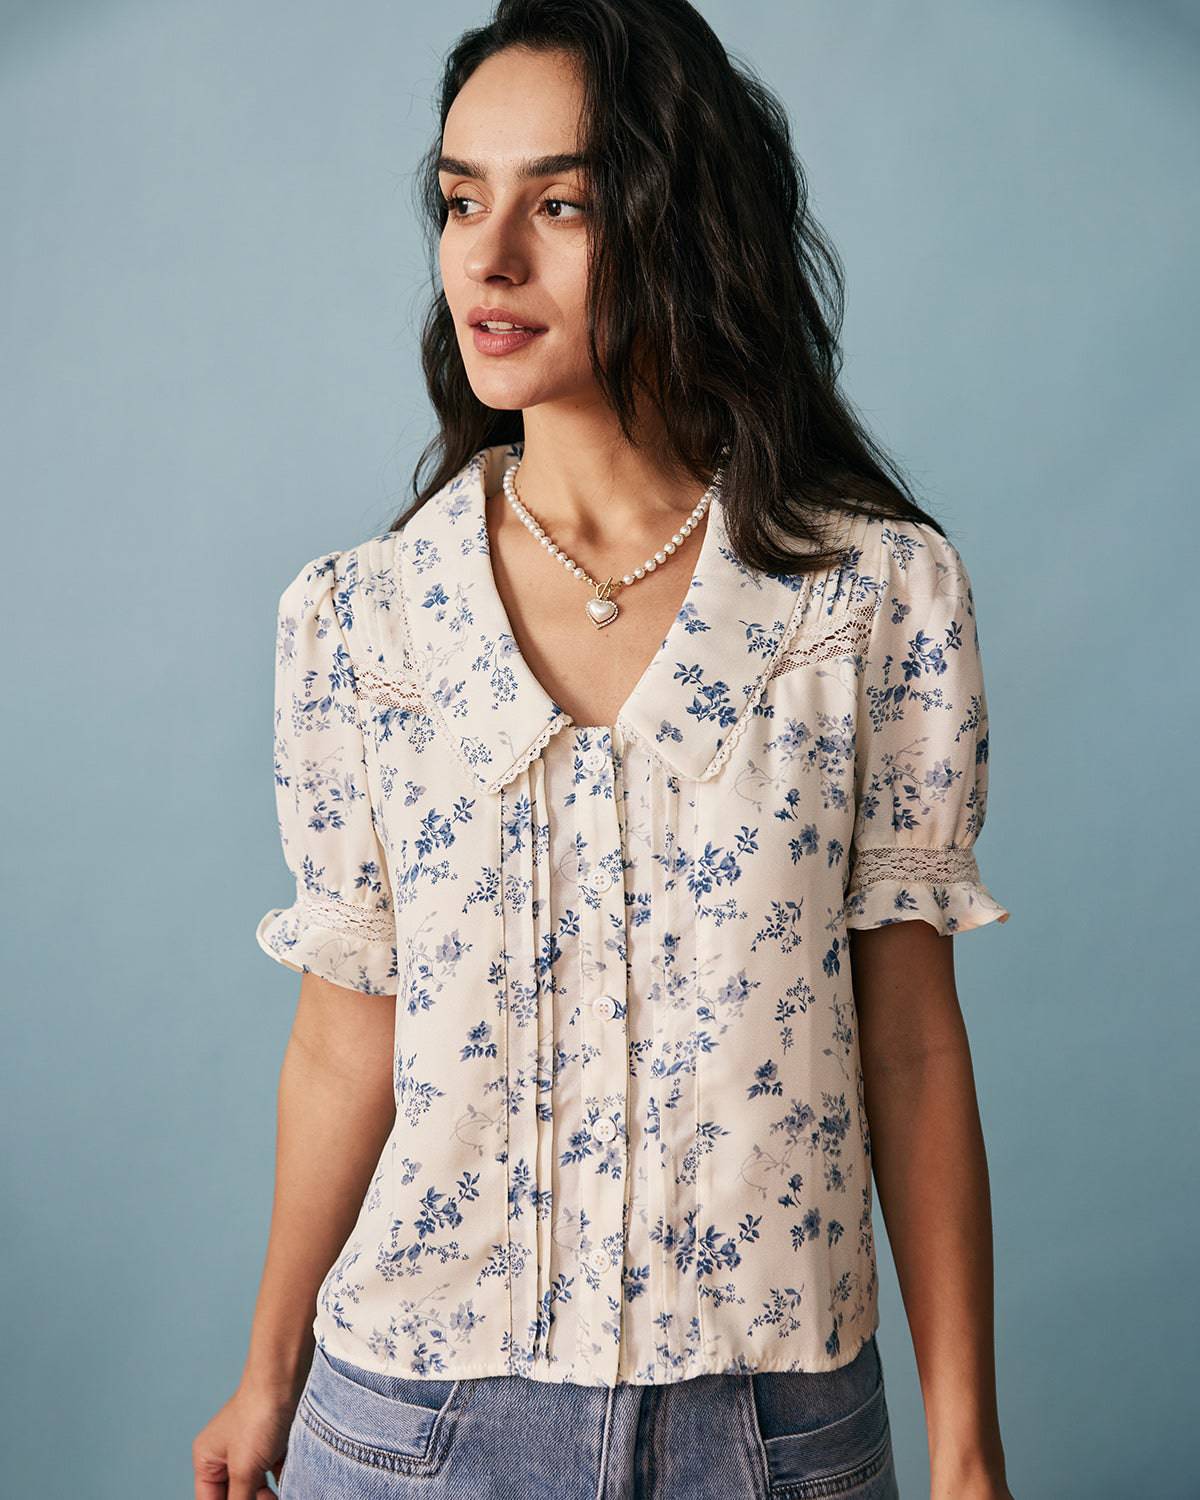 The Lace Spliced Pleated Floral Shirt - Floral Print Short Sleeve Button Up  Shirt - White - Tops | RIHOAS